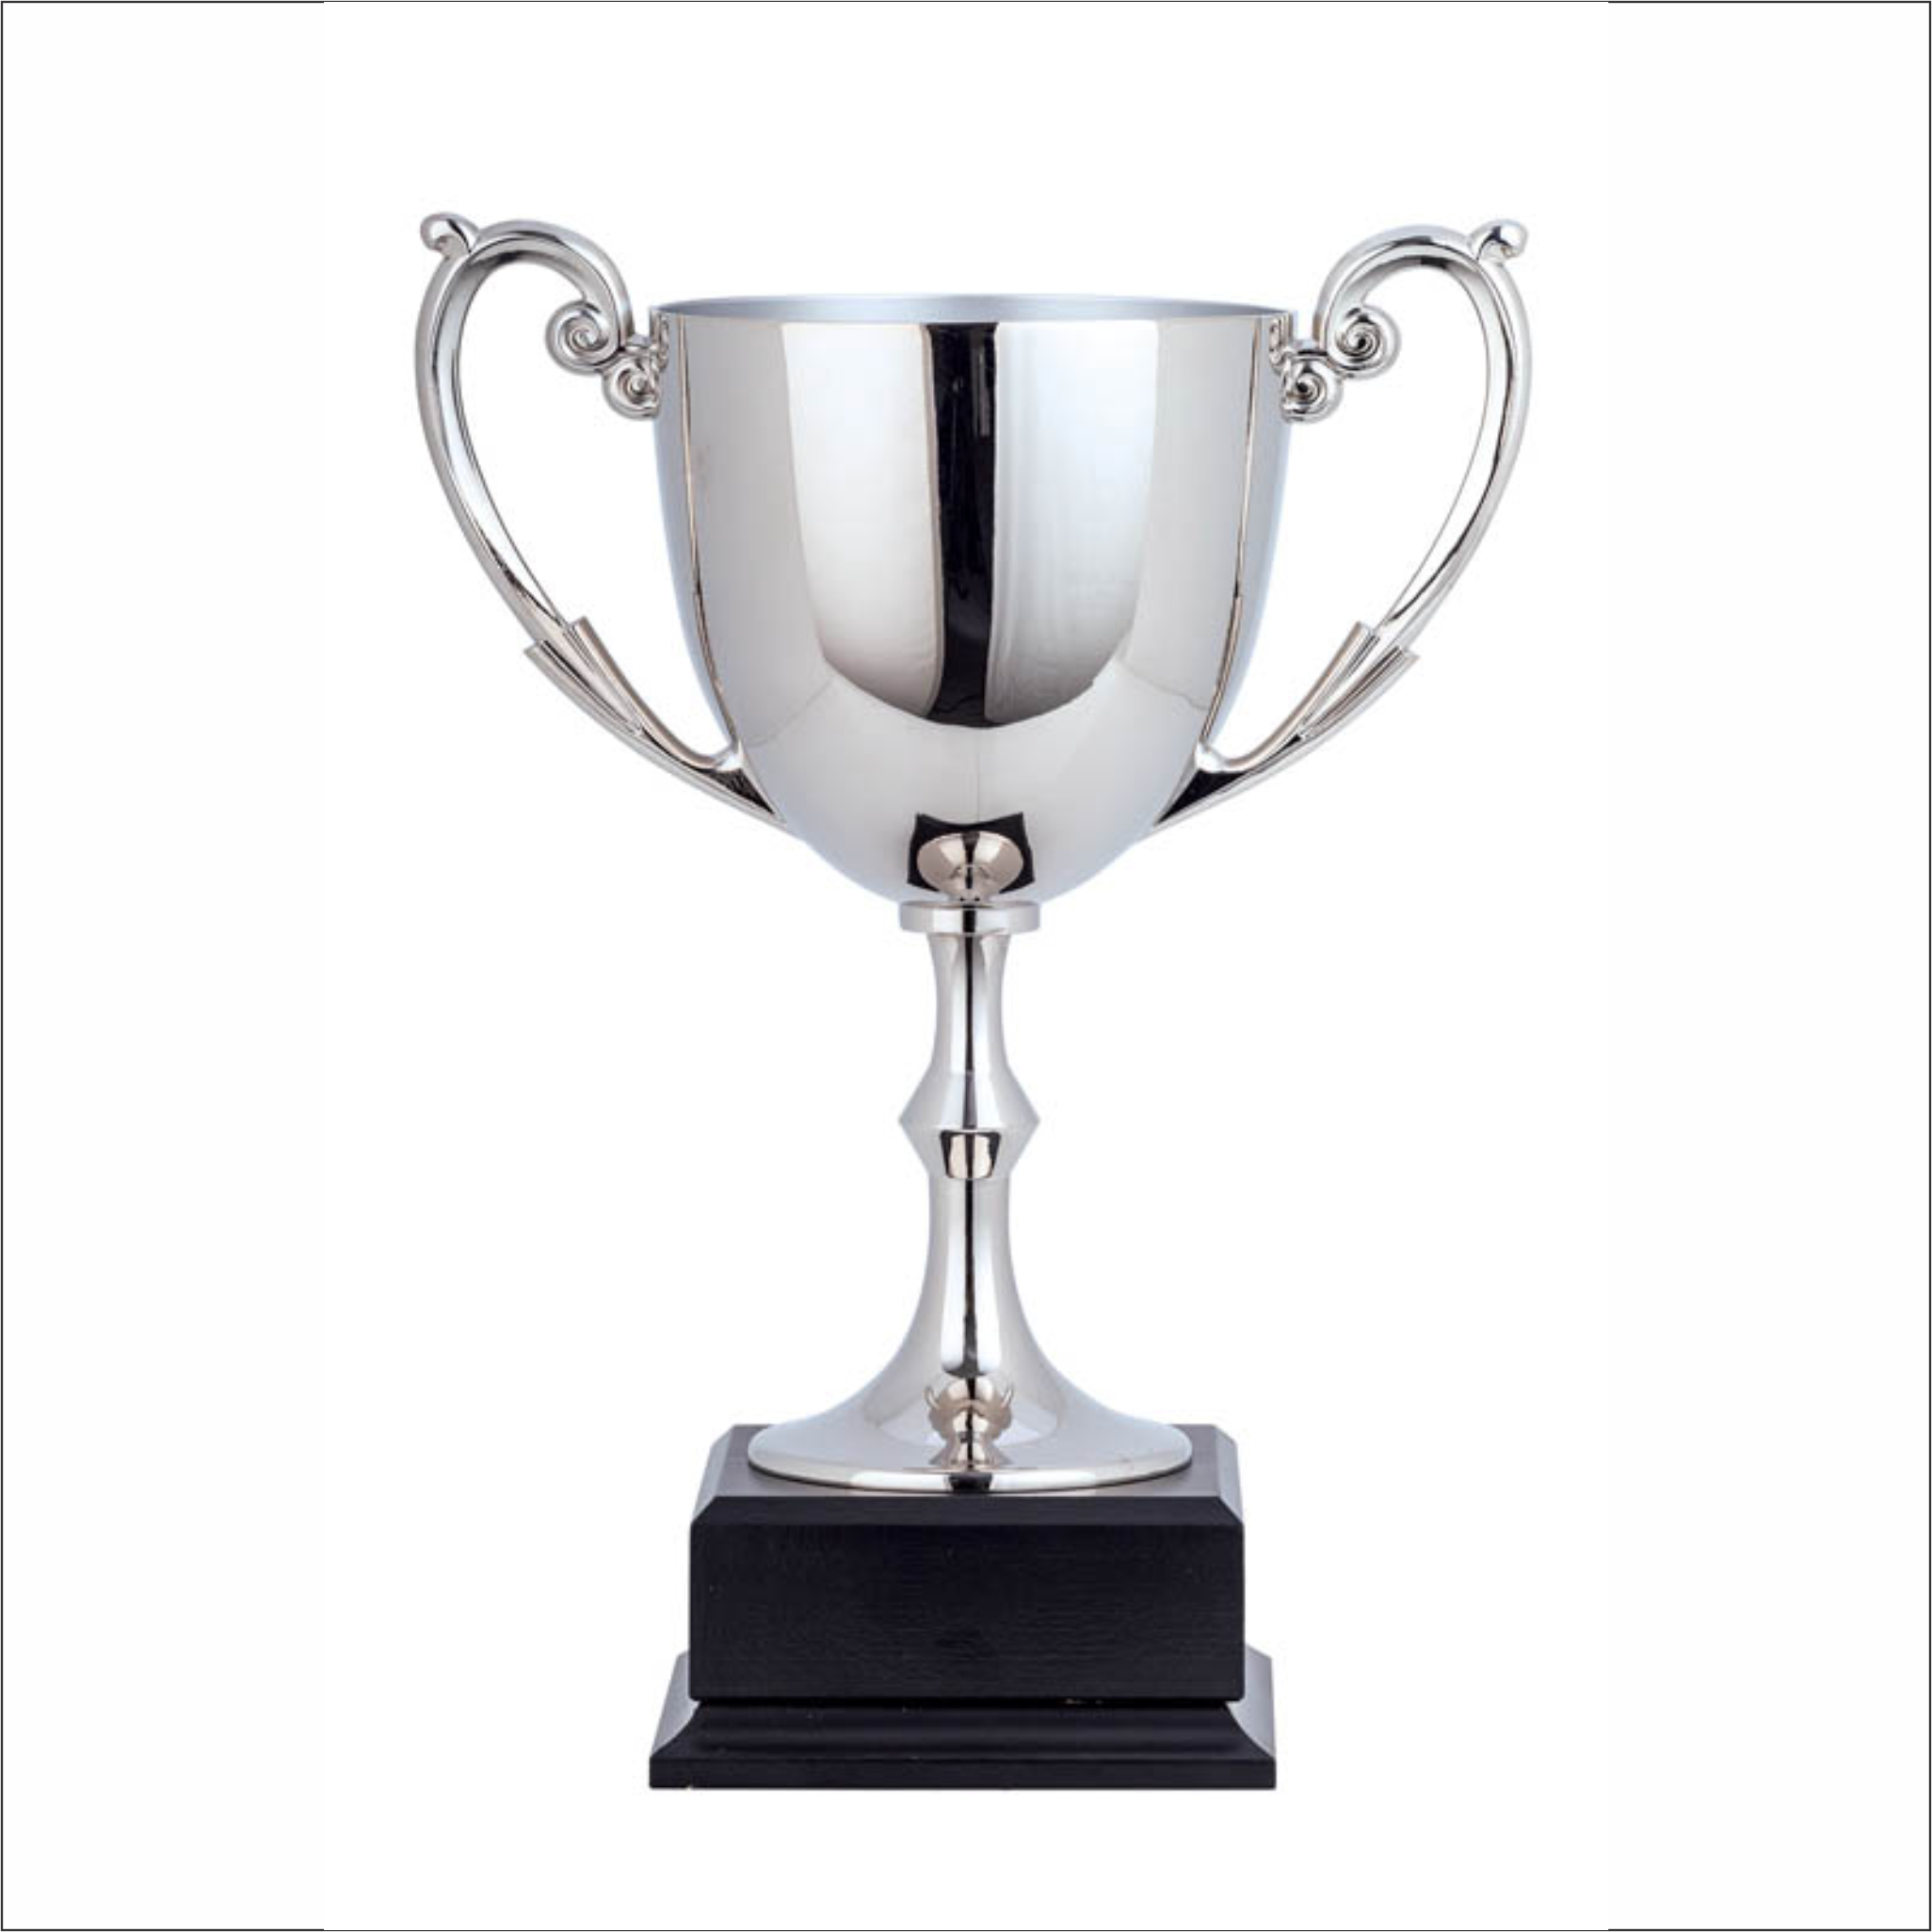 Nickel Plated Cup - Heavy Weight Solid Cast Metal - Square Black Base